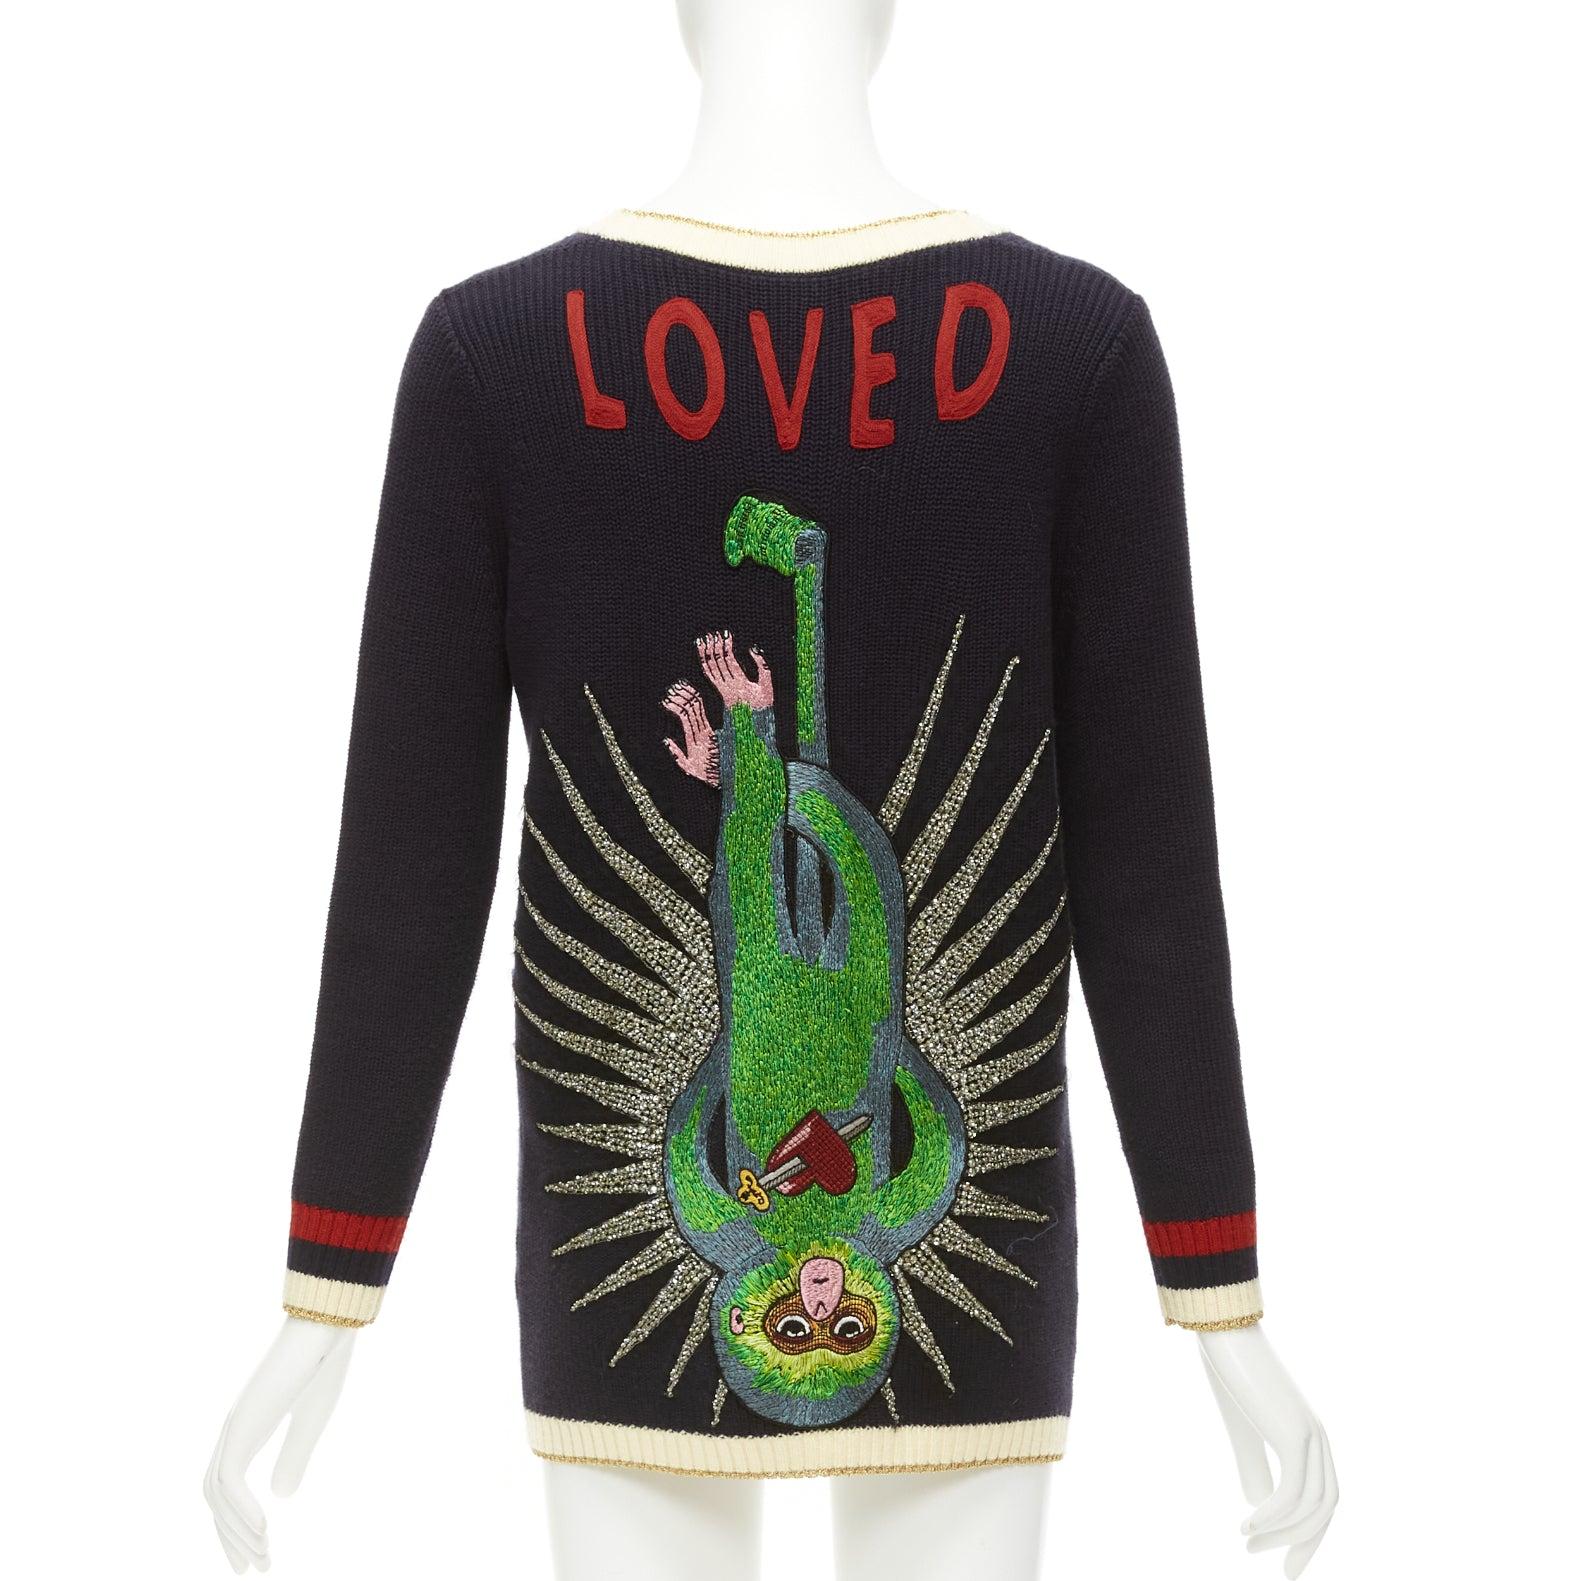 GUCCI navy cream trim cotton blend GG faux pearl button cardigan XXS
Reference: EALU/A00013
Brand: Gucci
Designer: Alessandro Michele
Material: Cotton, Blend
Color: Navy, Multicolour
Pattern: Solid
Closure: Button
Extra Details: Green embroidered